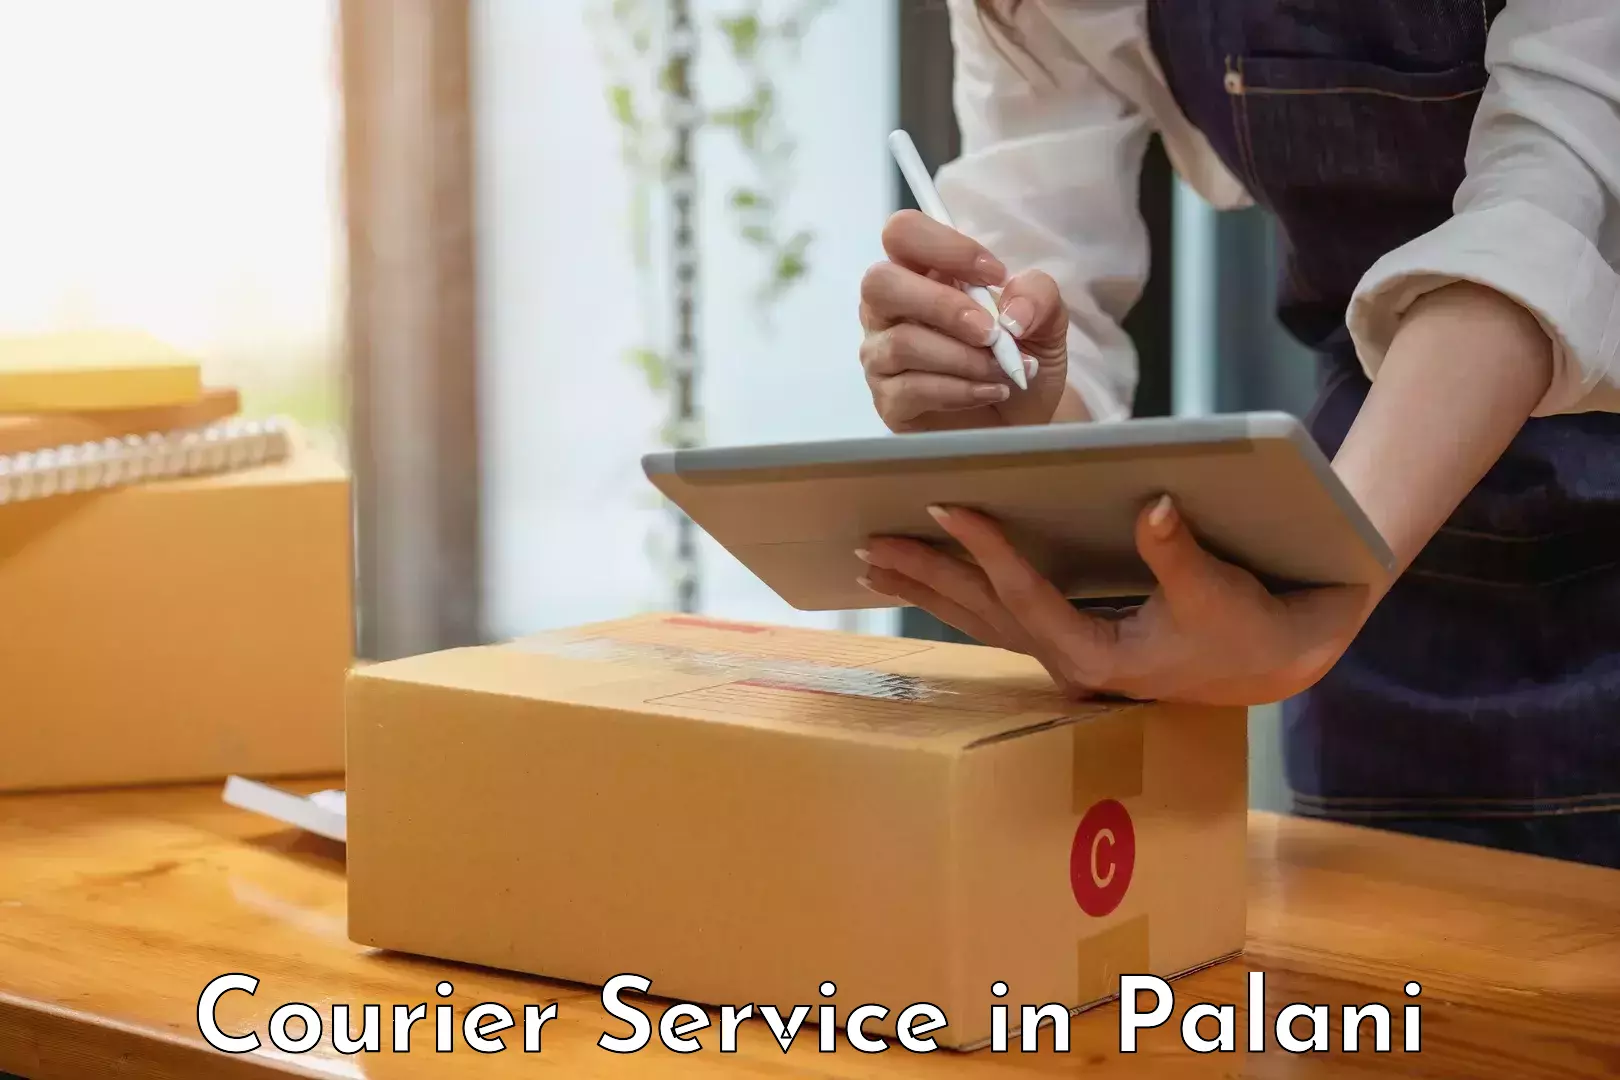 Retail shipping solutions in Palani